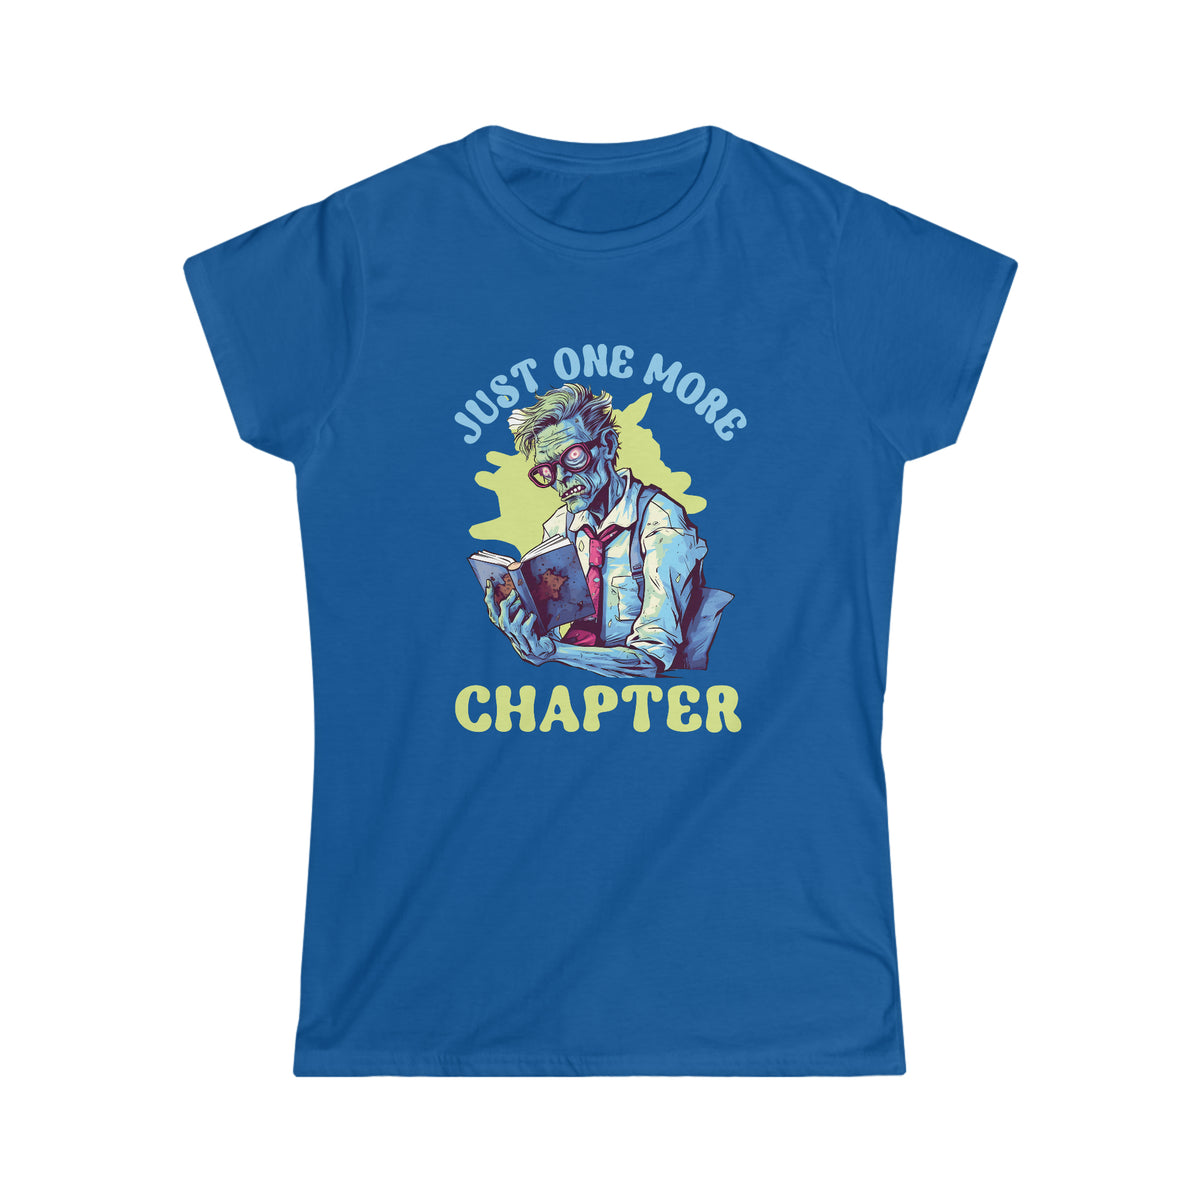 Just One More Chapter Zombie Shirt | Halloween Book Shirt | Book Lover shirt | Book Lover Gift  | Women's Slim-fit Soft Style T-shirt